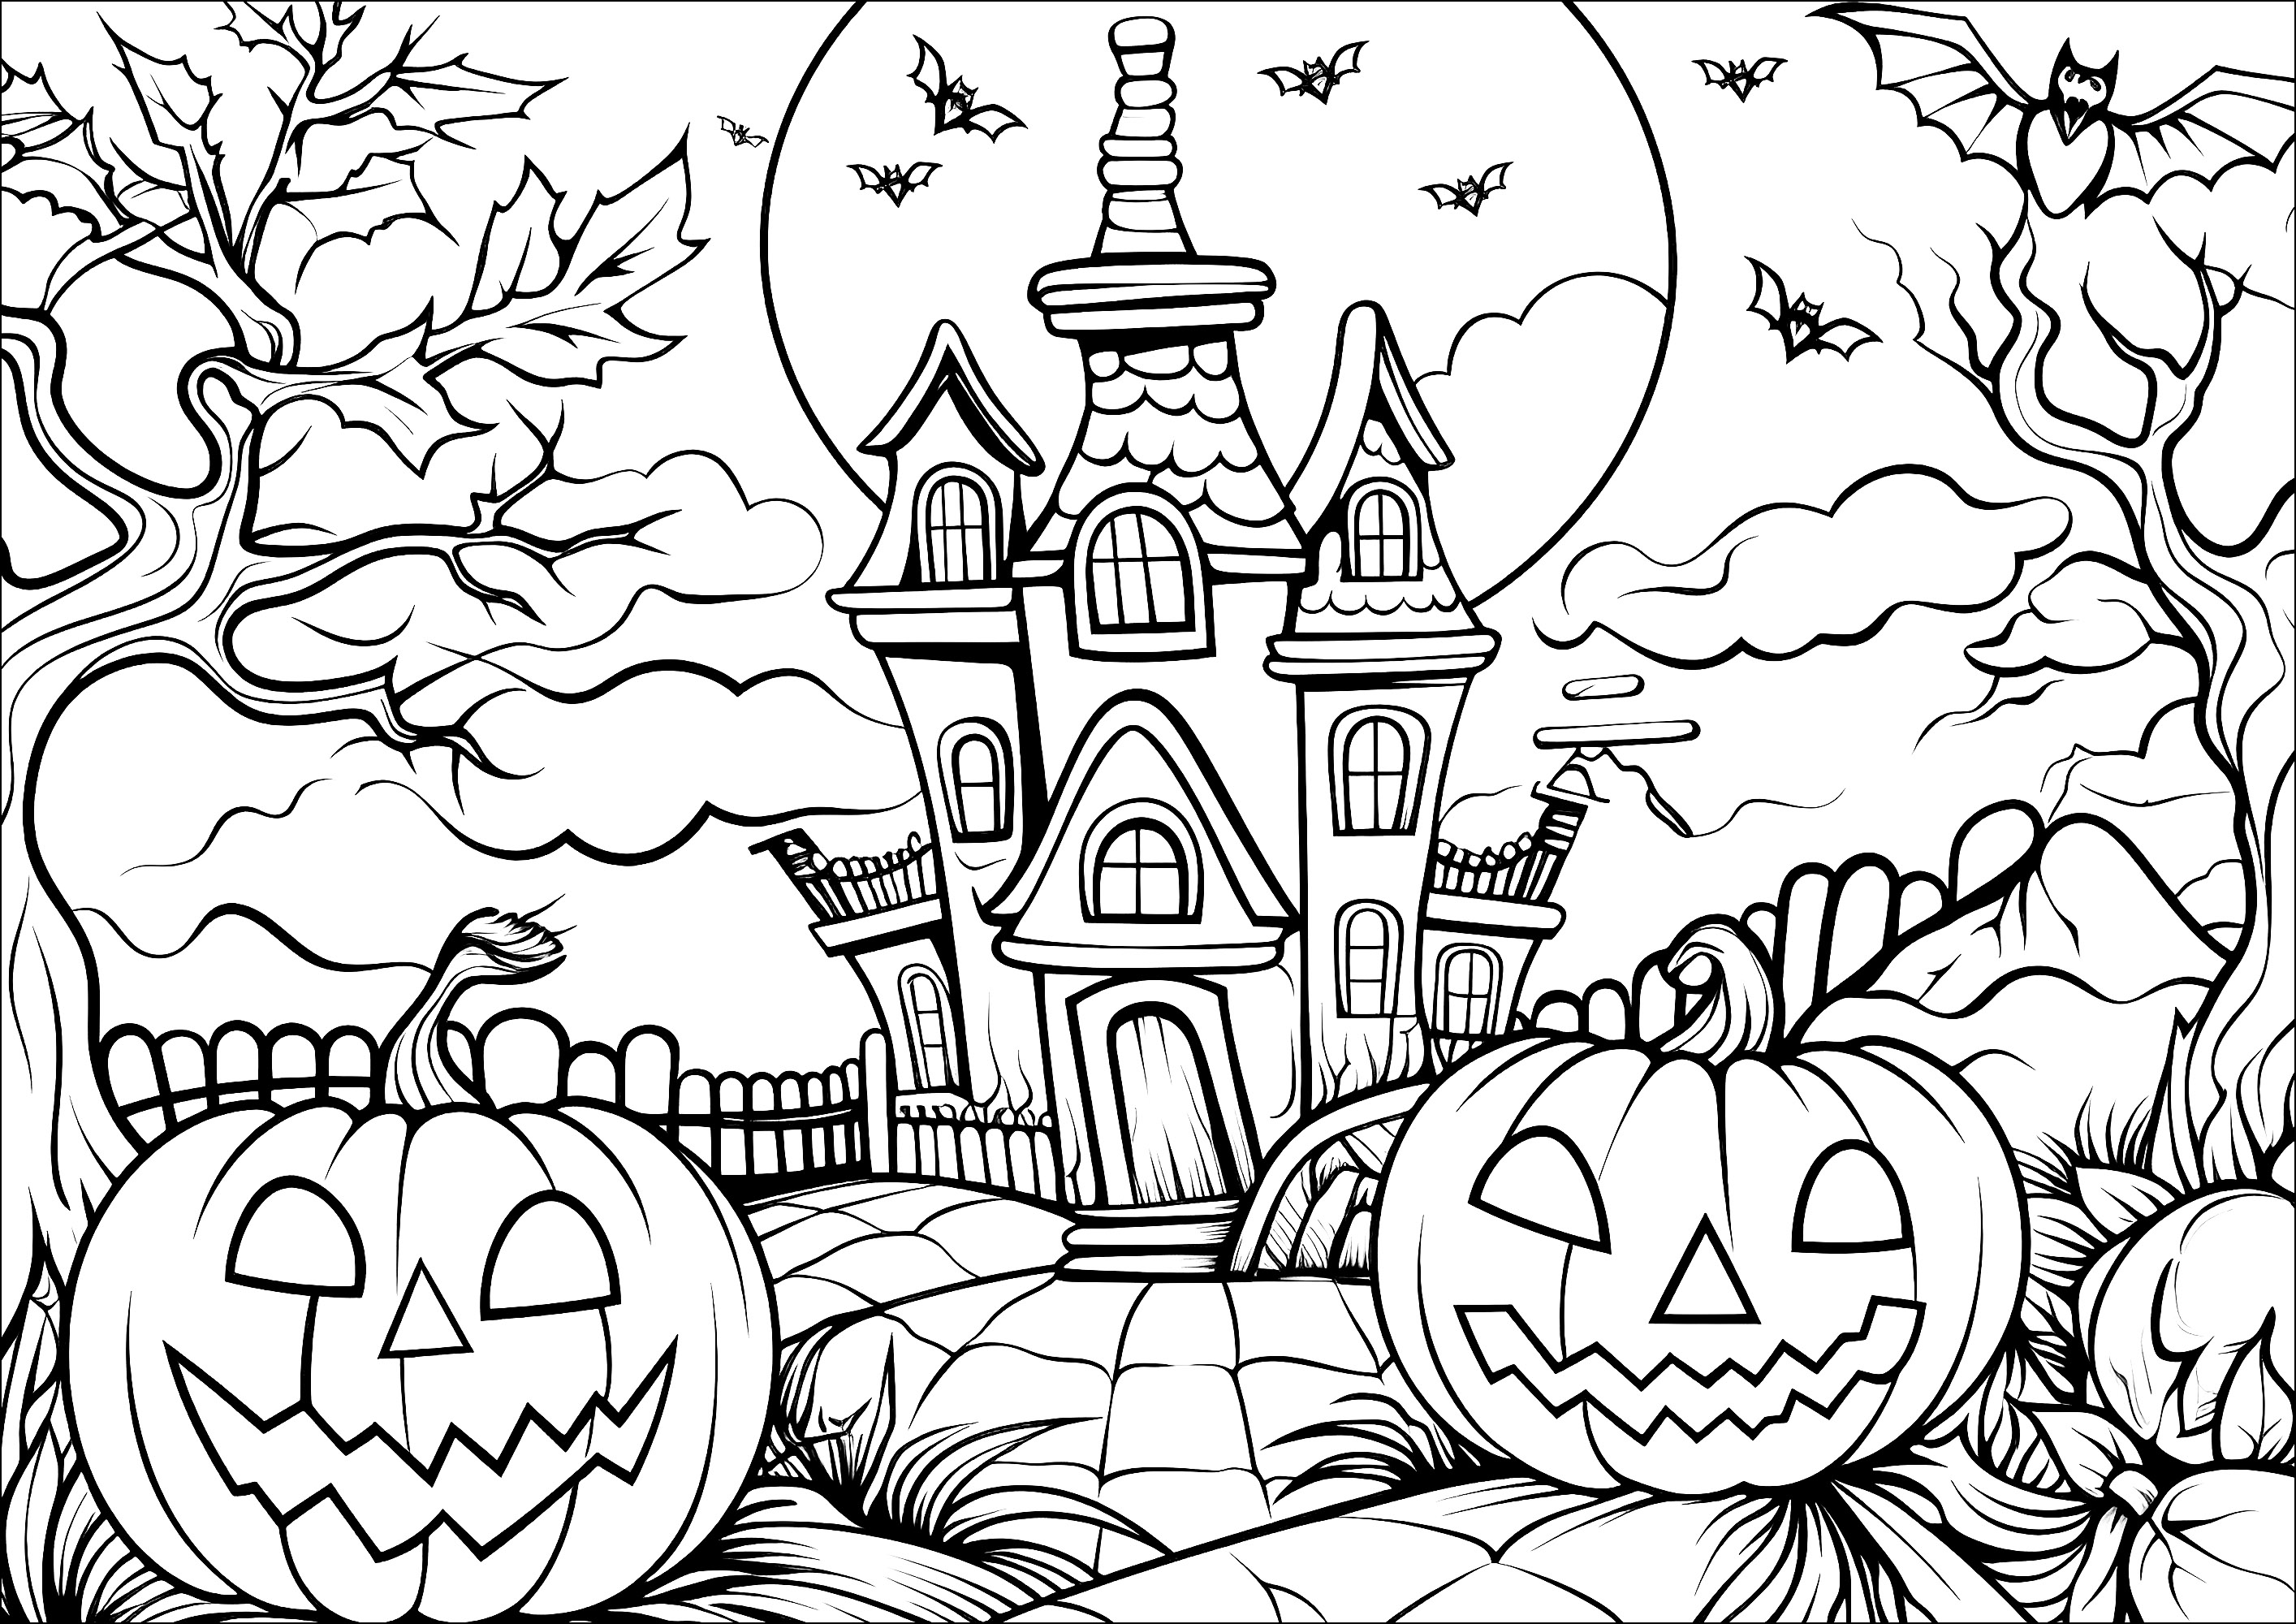 Haunted house, pumpkins and bats. - Image by pngtree.com